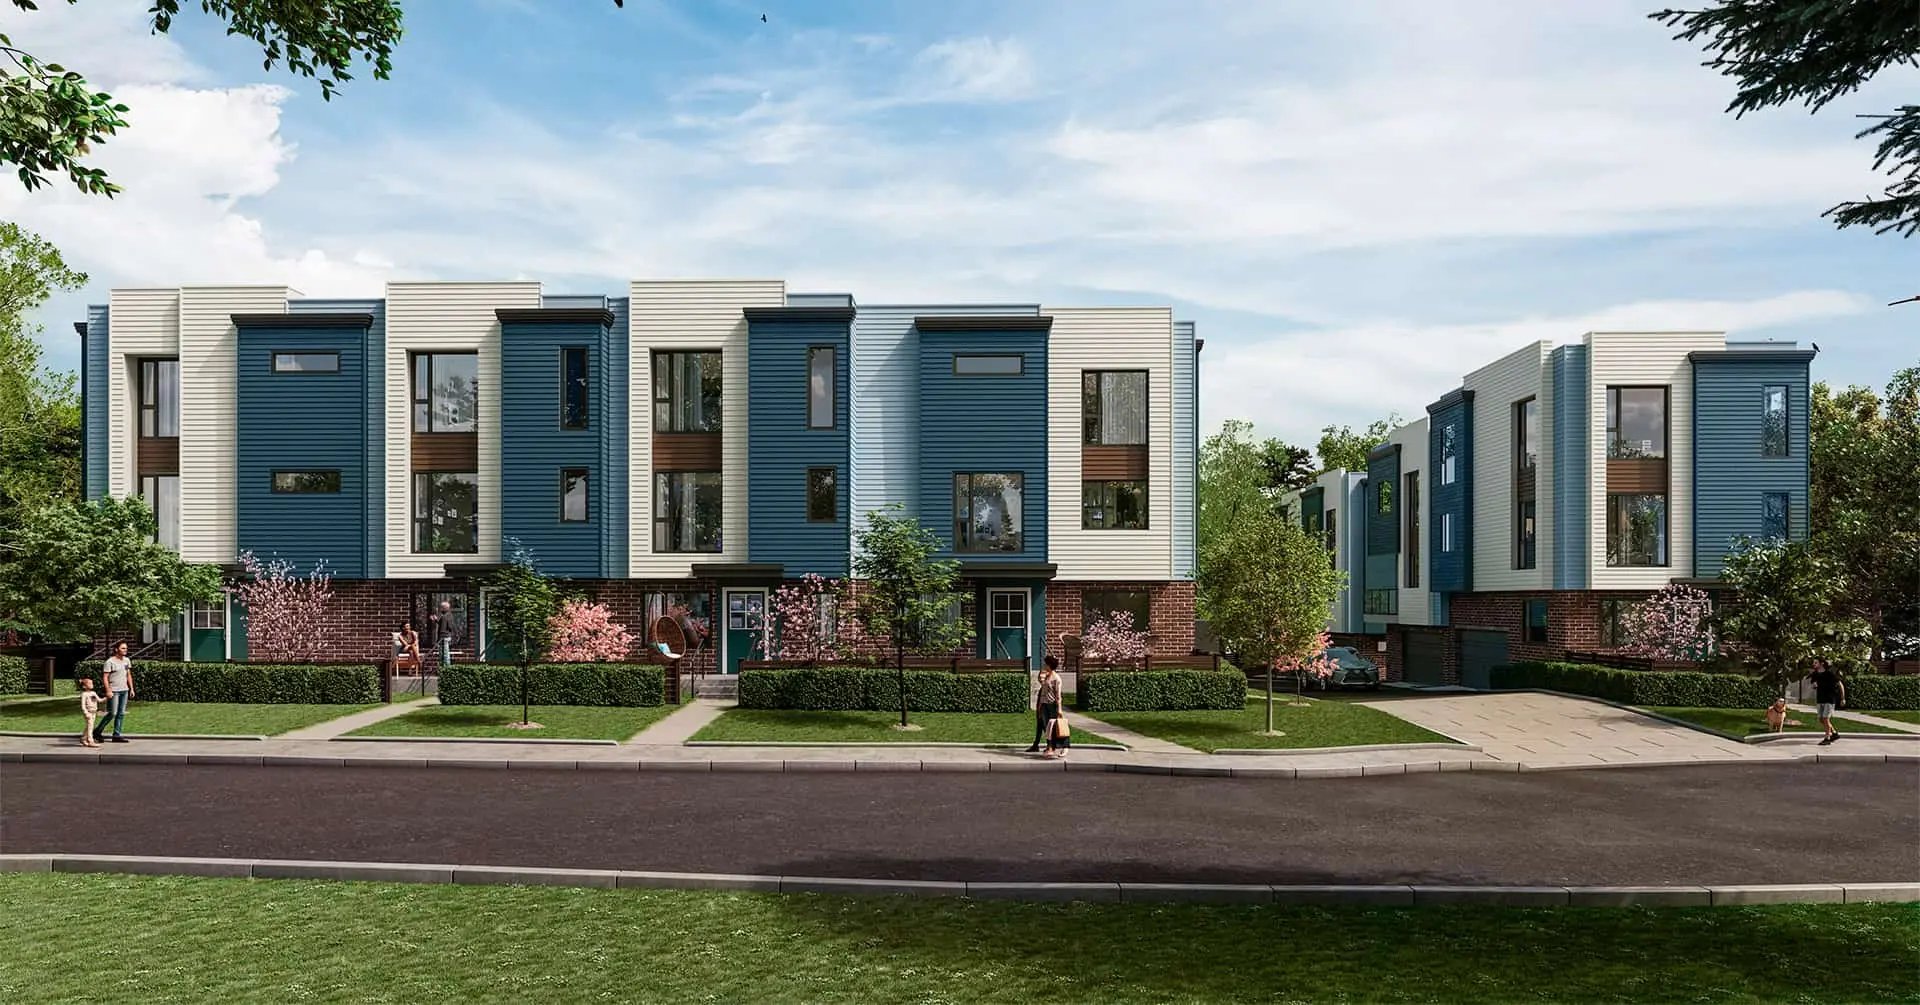 Crestview Living by Alvair Group is an 18-unit South Surrey townhome development.